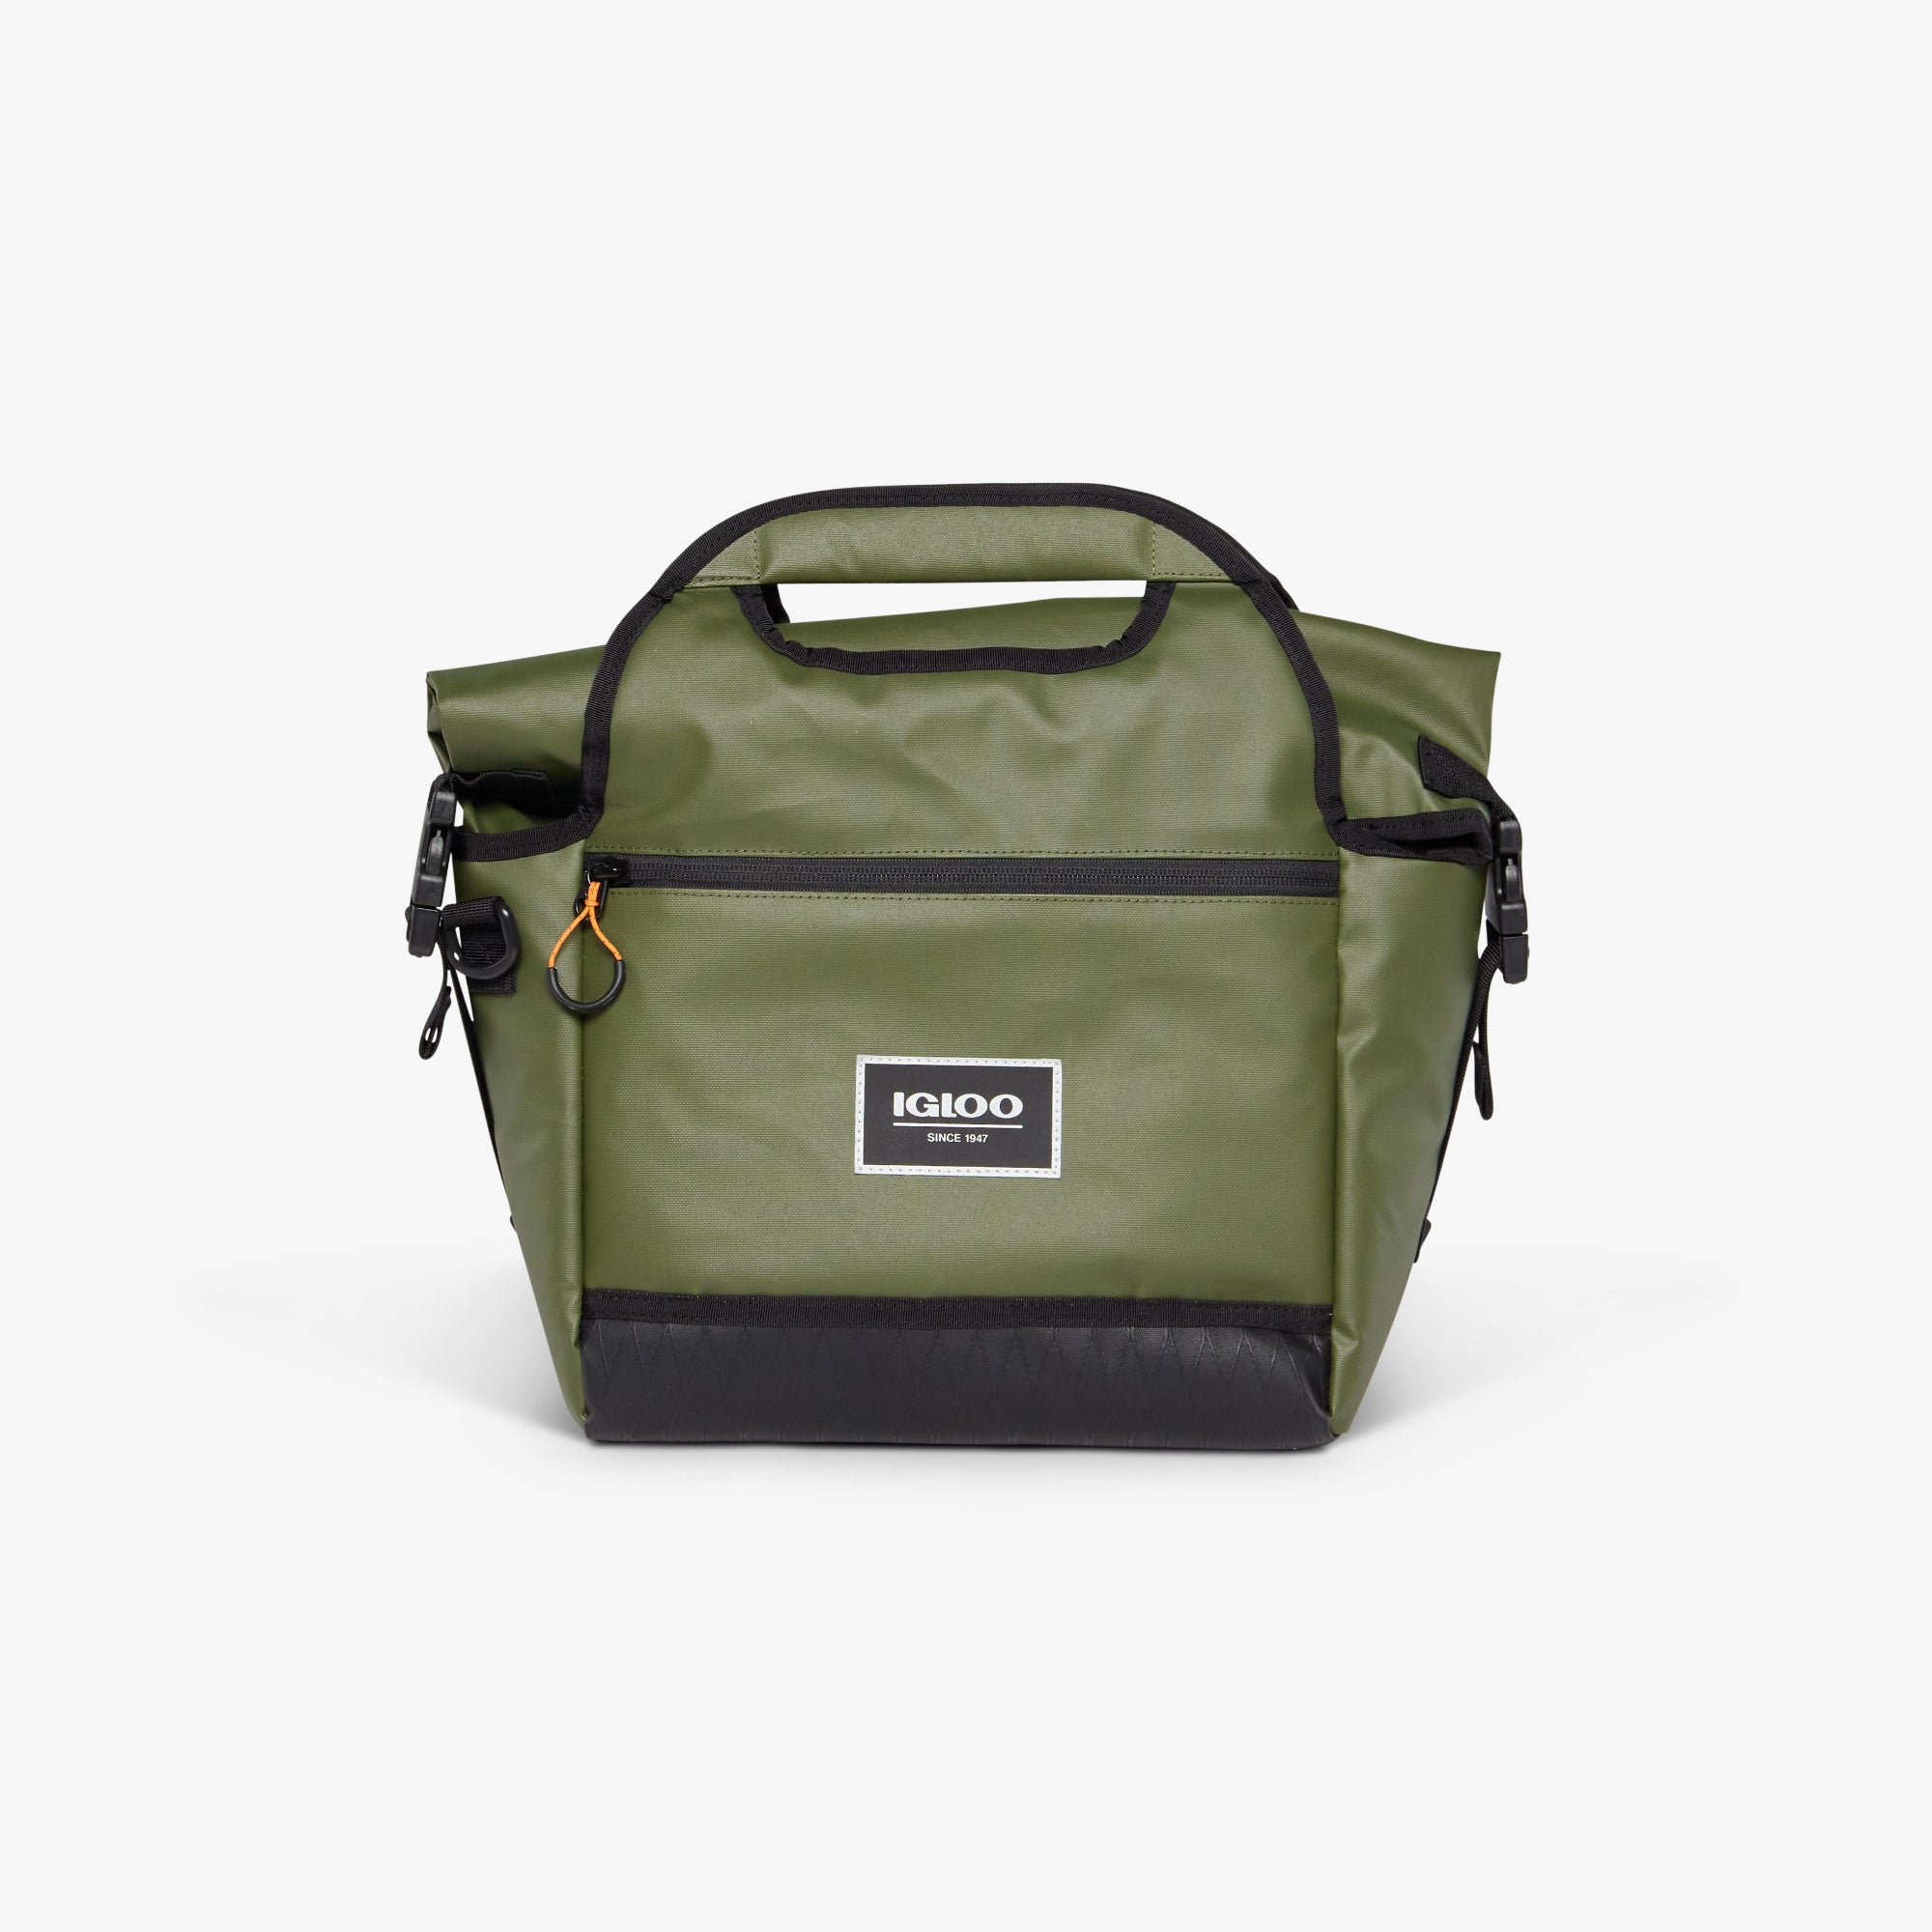 Igloo Pursuit 16 Can Portable Lunch Box Bag Cooler w/ Padded Strap Chive Green